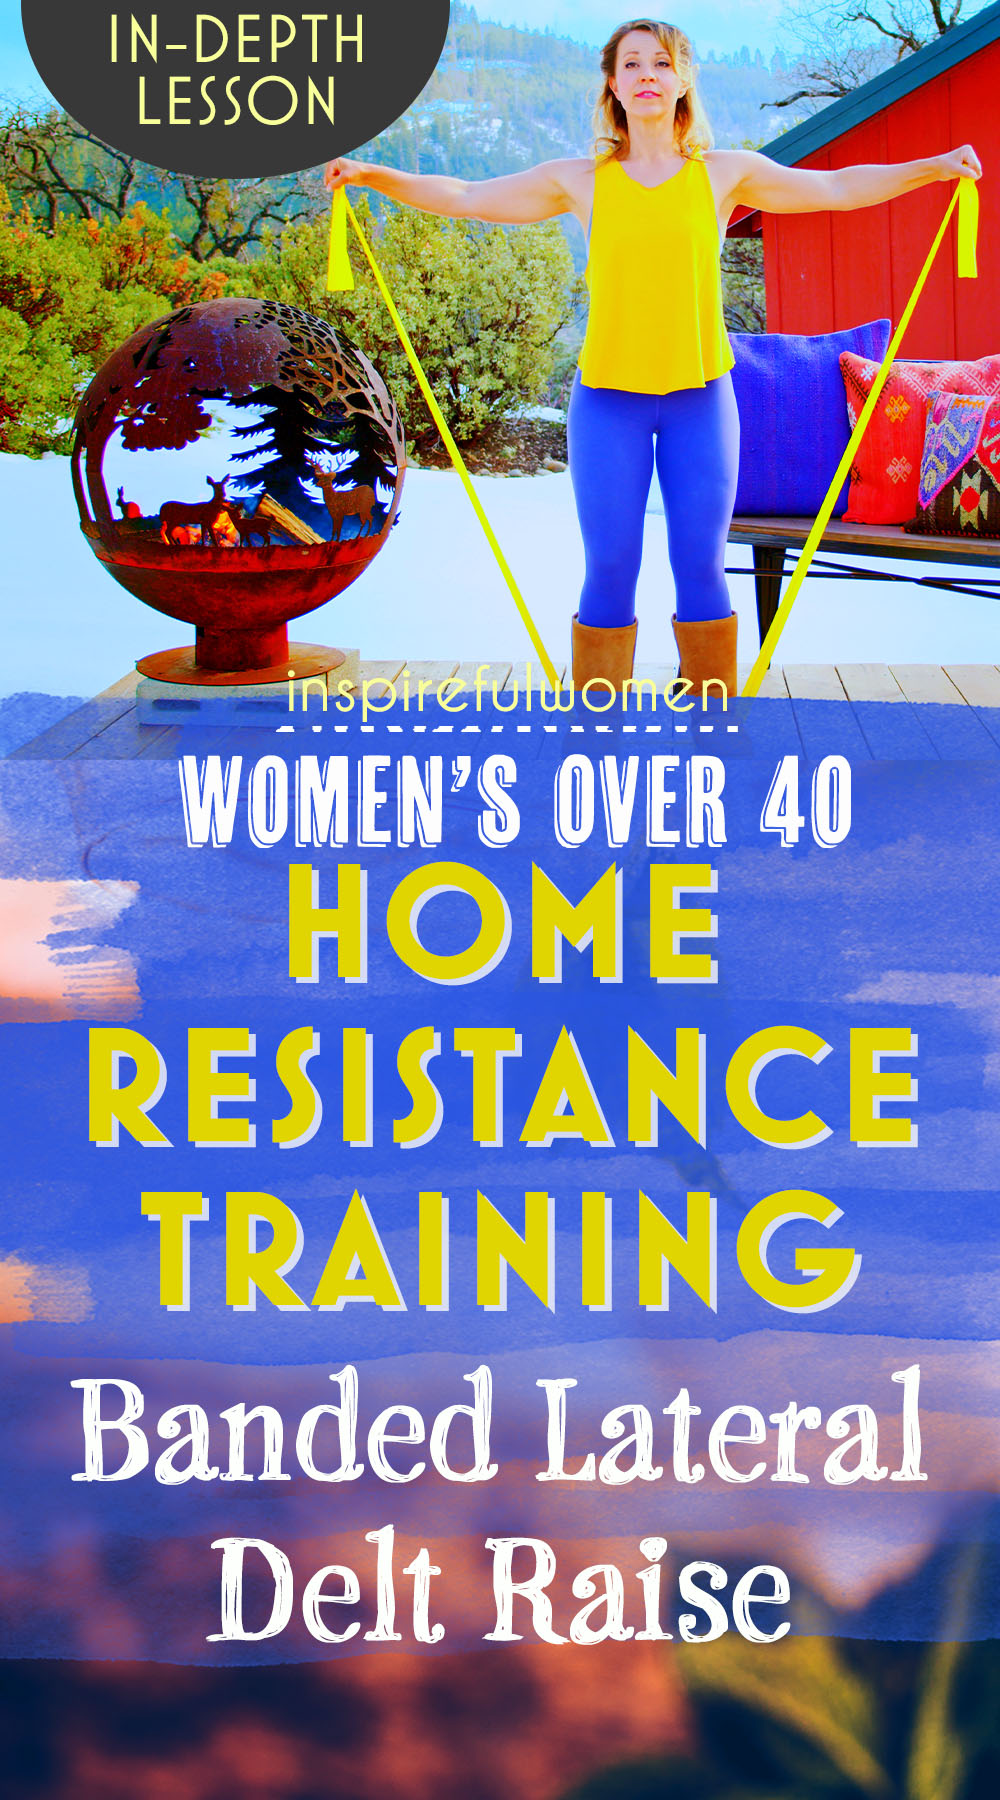 resistance-band-lateral-delt-raise-shoulder-exercise-at-home-training-for-women-over-40